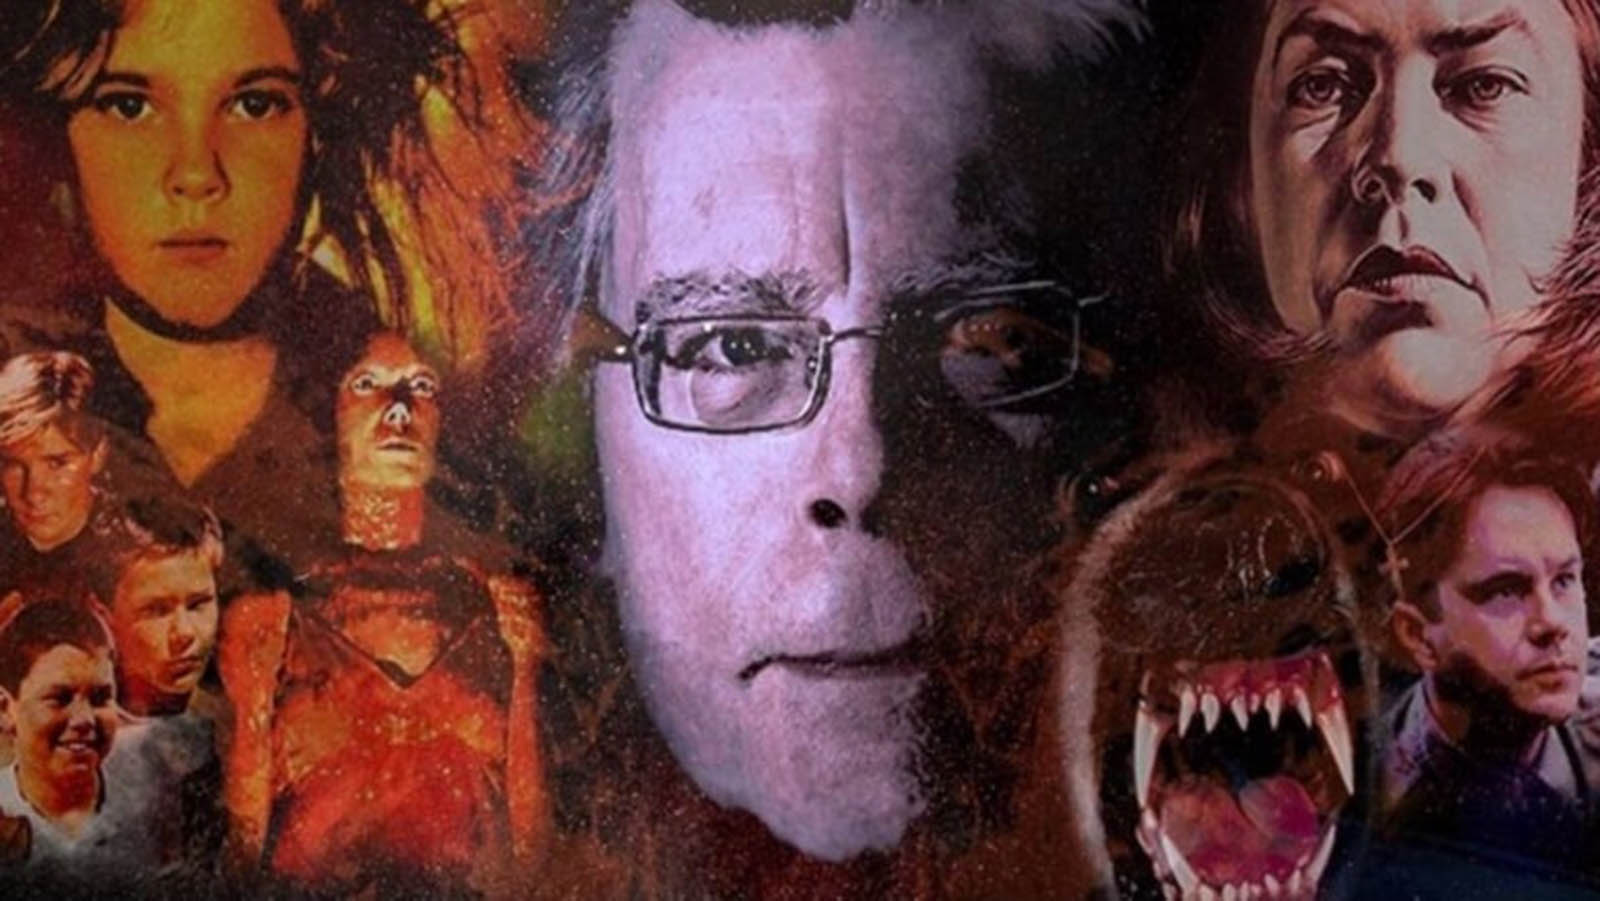 Stephen King Limited Edition and Trade Edition Subscription - Special Offer Today Only!